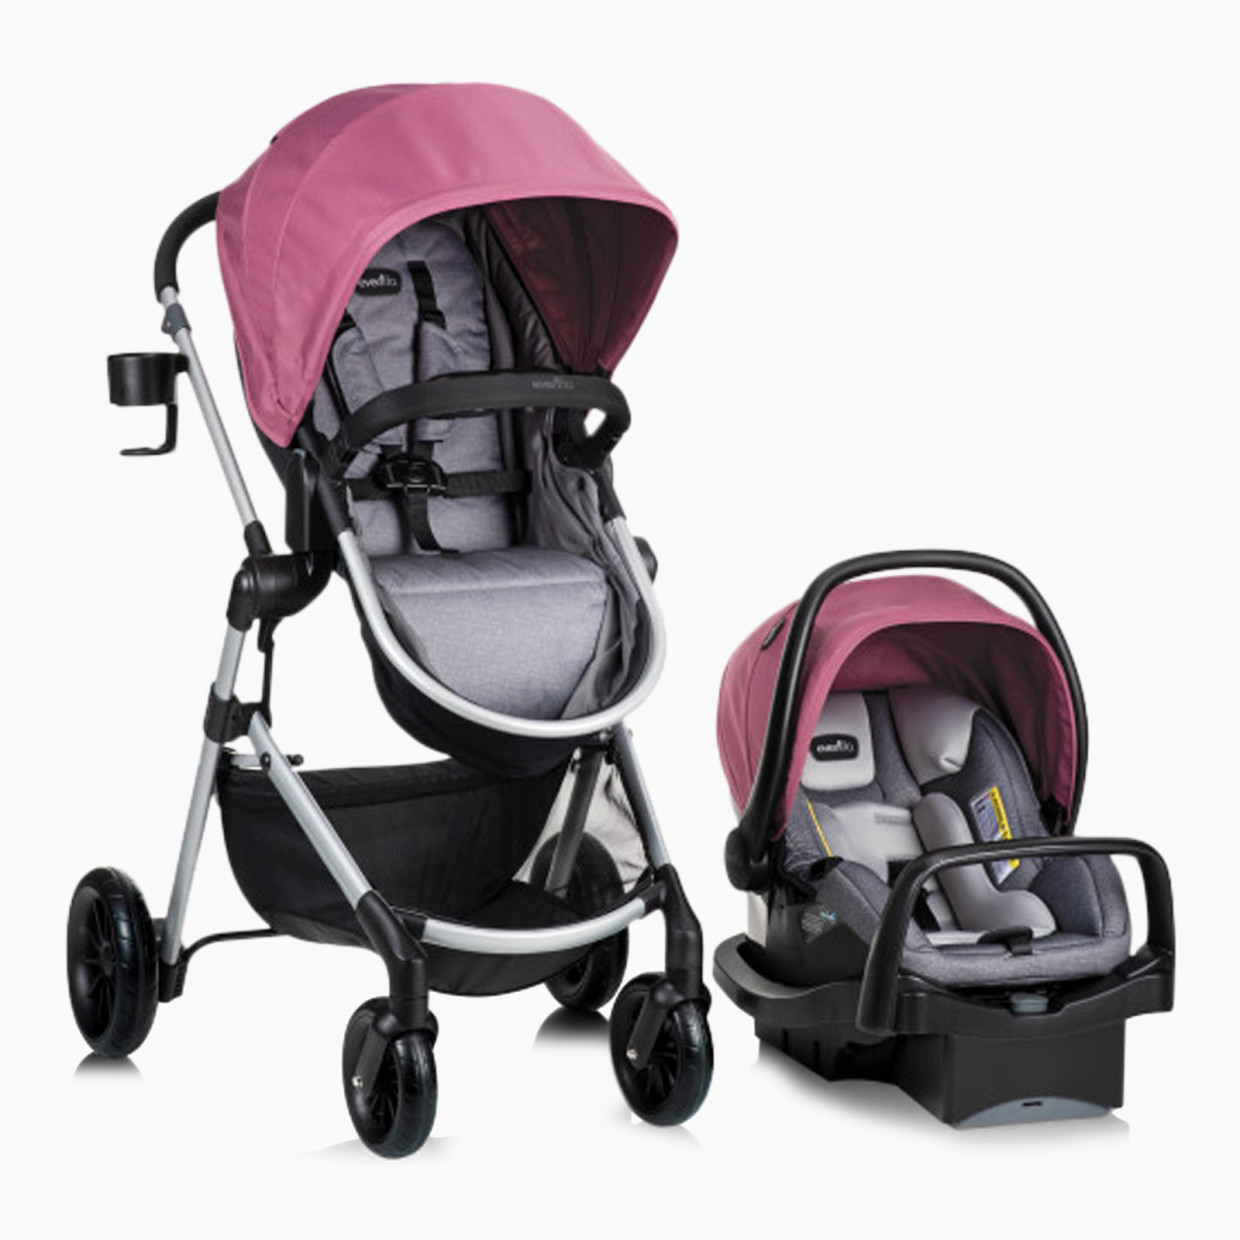 Evenflo Pivot Travel System with Safemax Infant Car Seat - Dusty Rose.